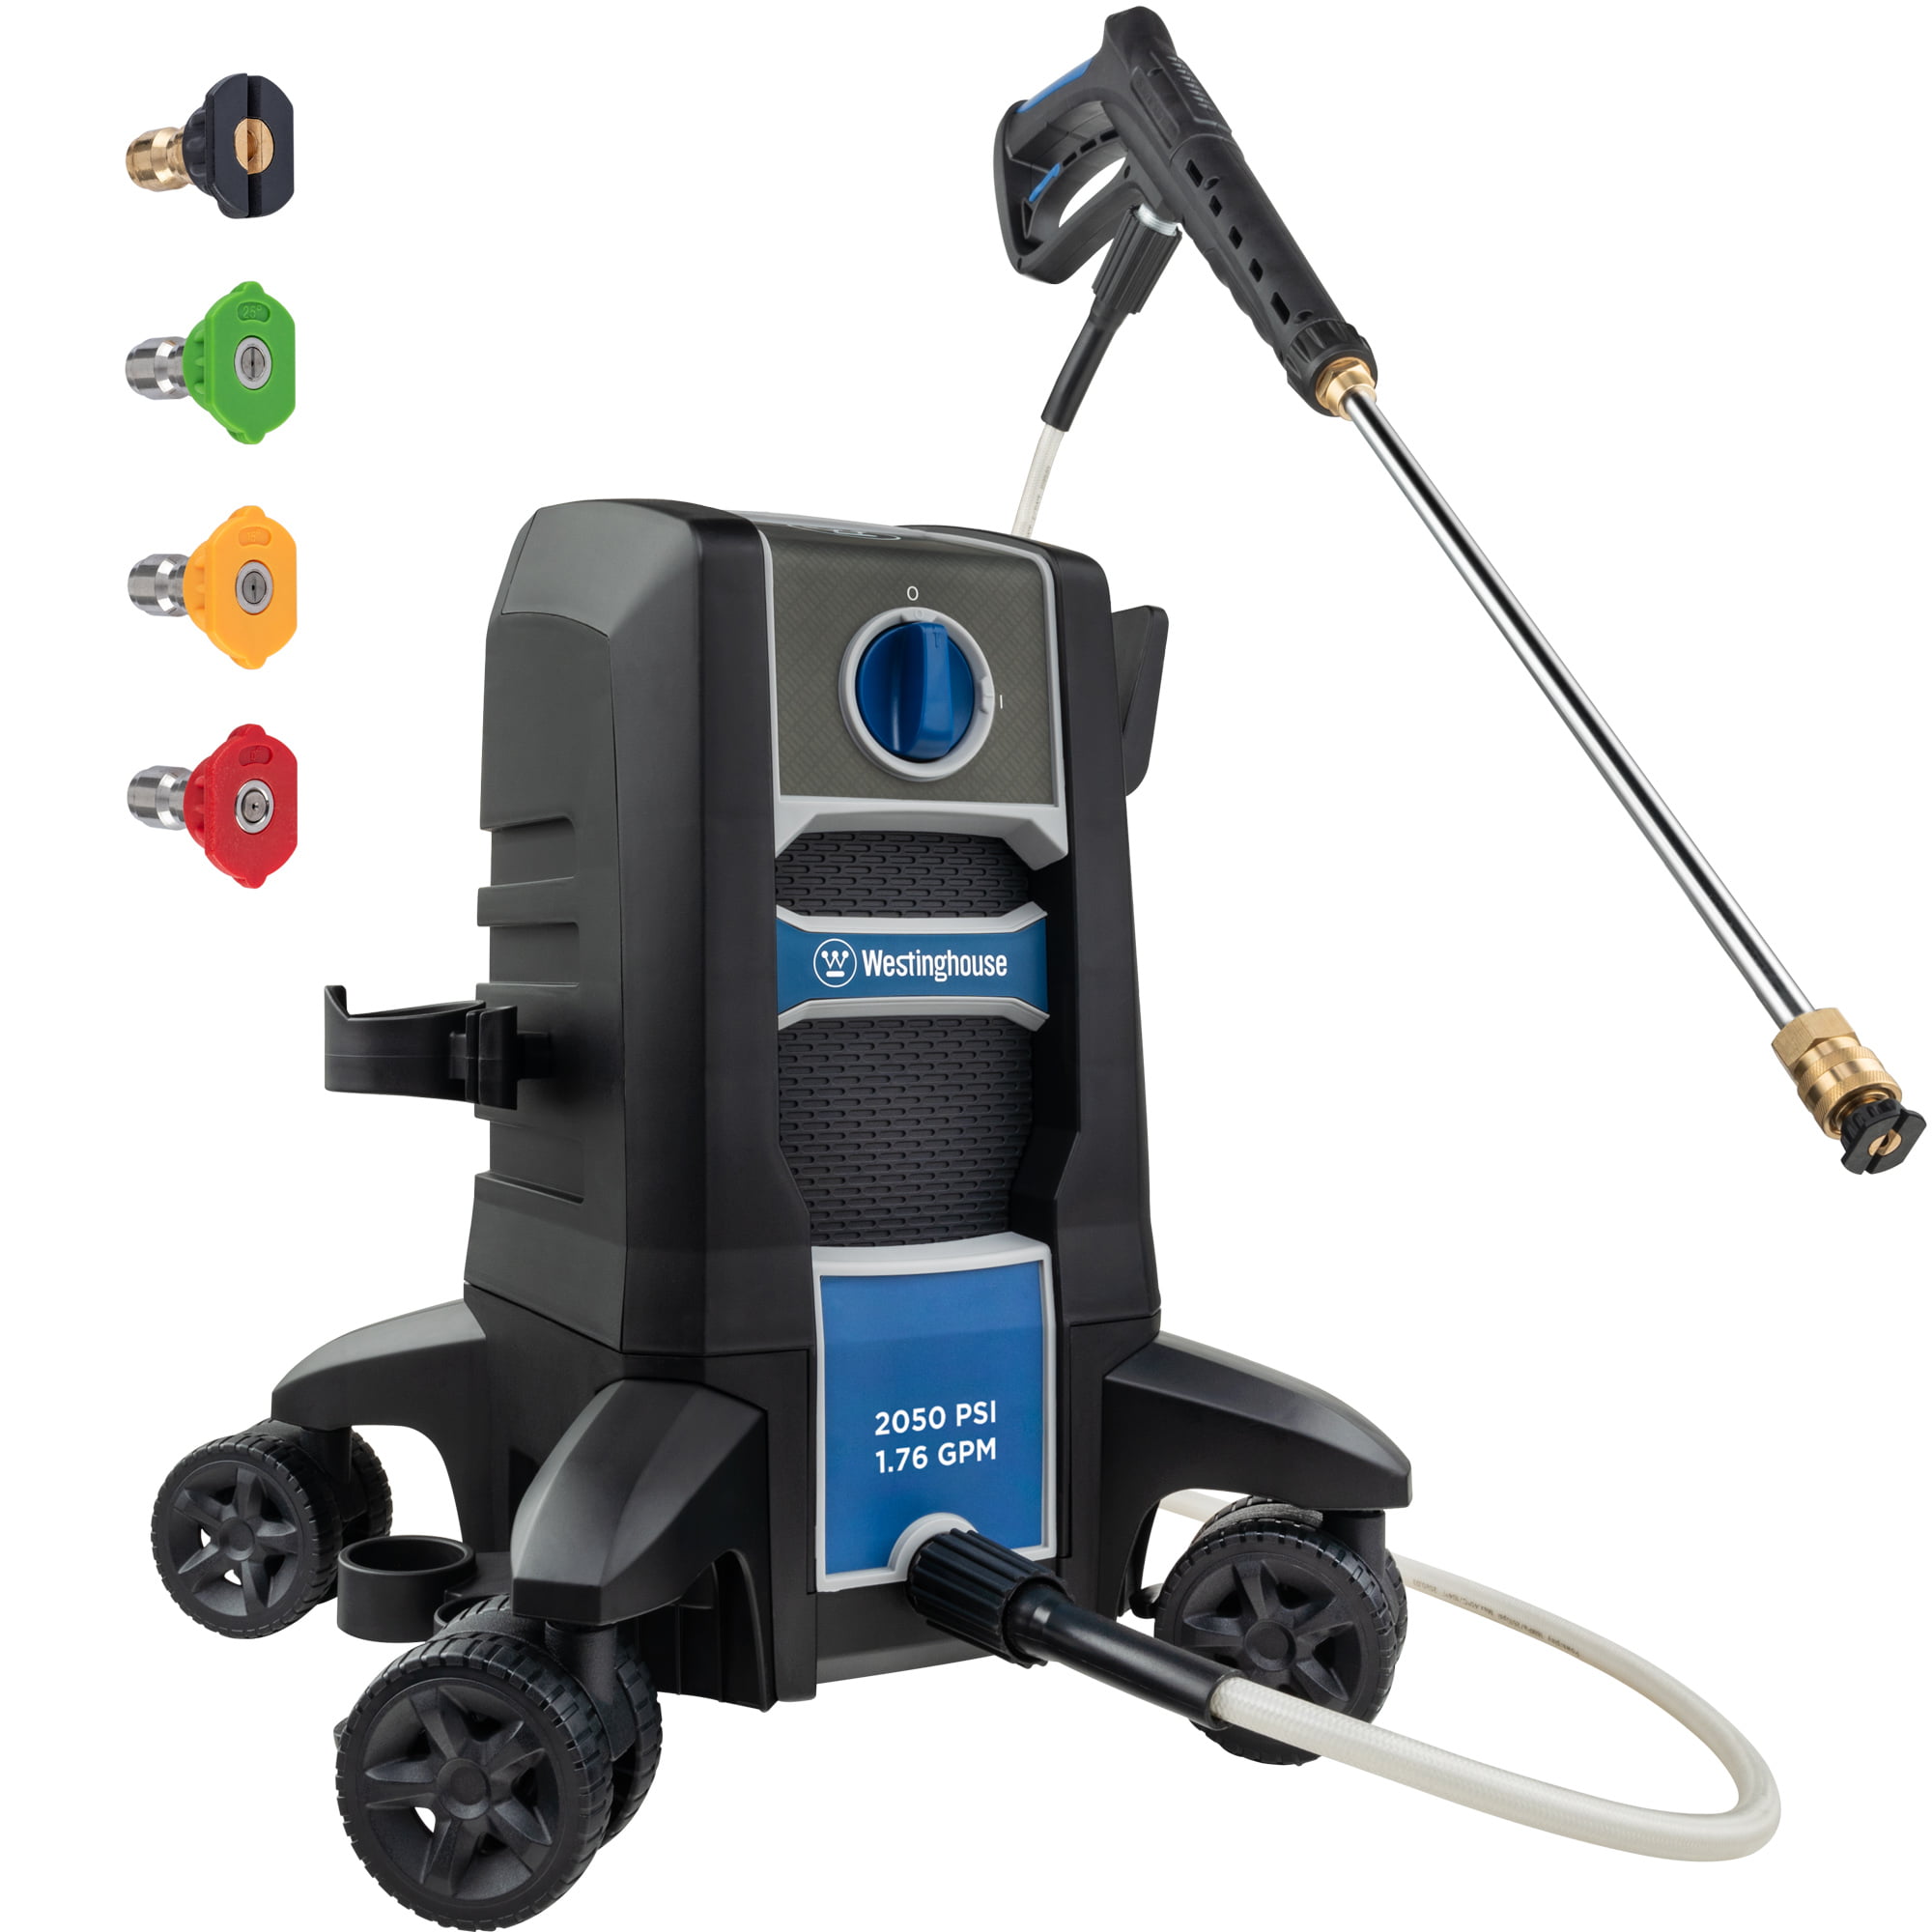 Paxcess Electric Power Wash Machine Portable Pressure Car Washer with Adjustable Spray Nozzle Foam Cannon for Driveways Patios and Washing Vehicles